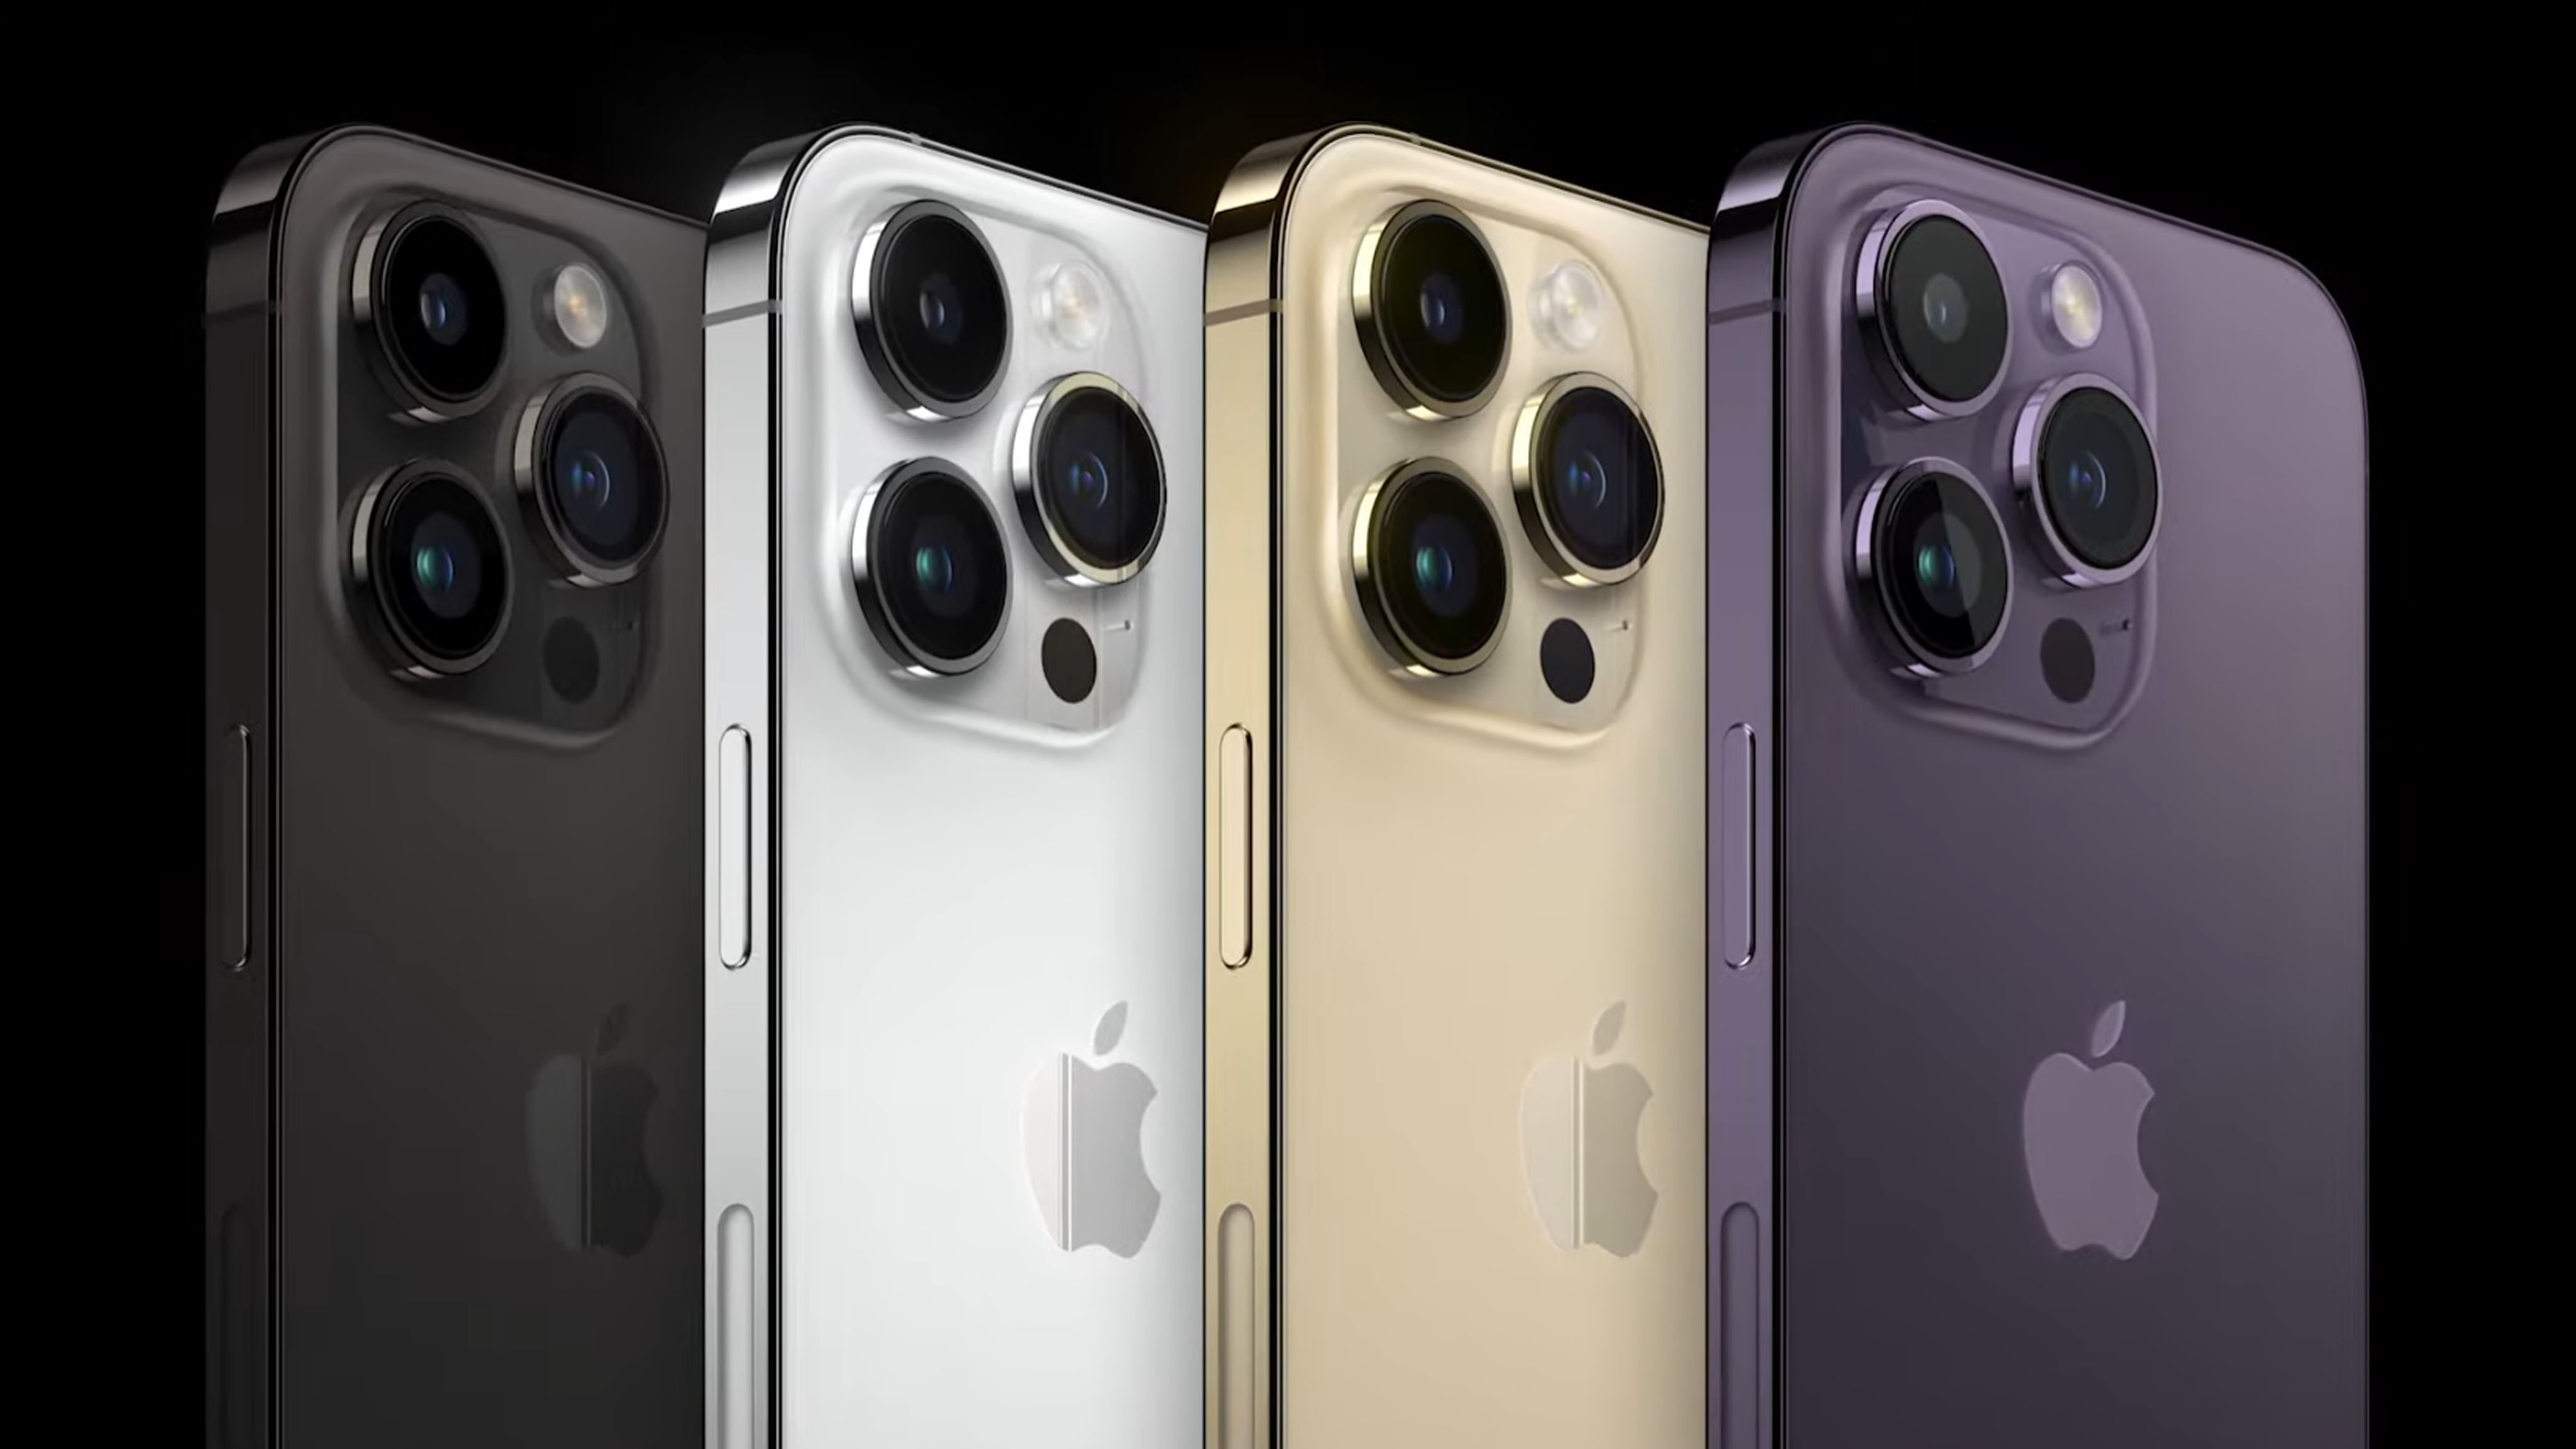 iPhone 14 Pro camera: What does it mean for photographers?